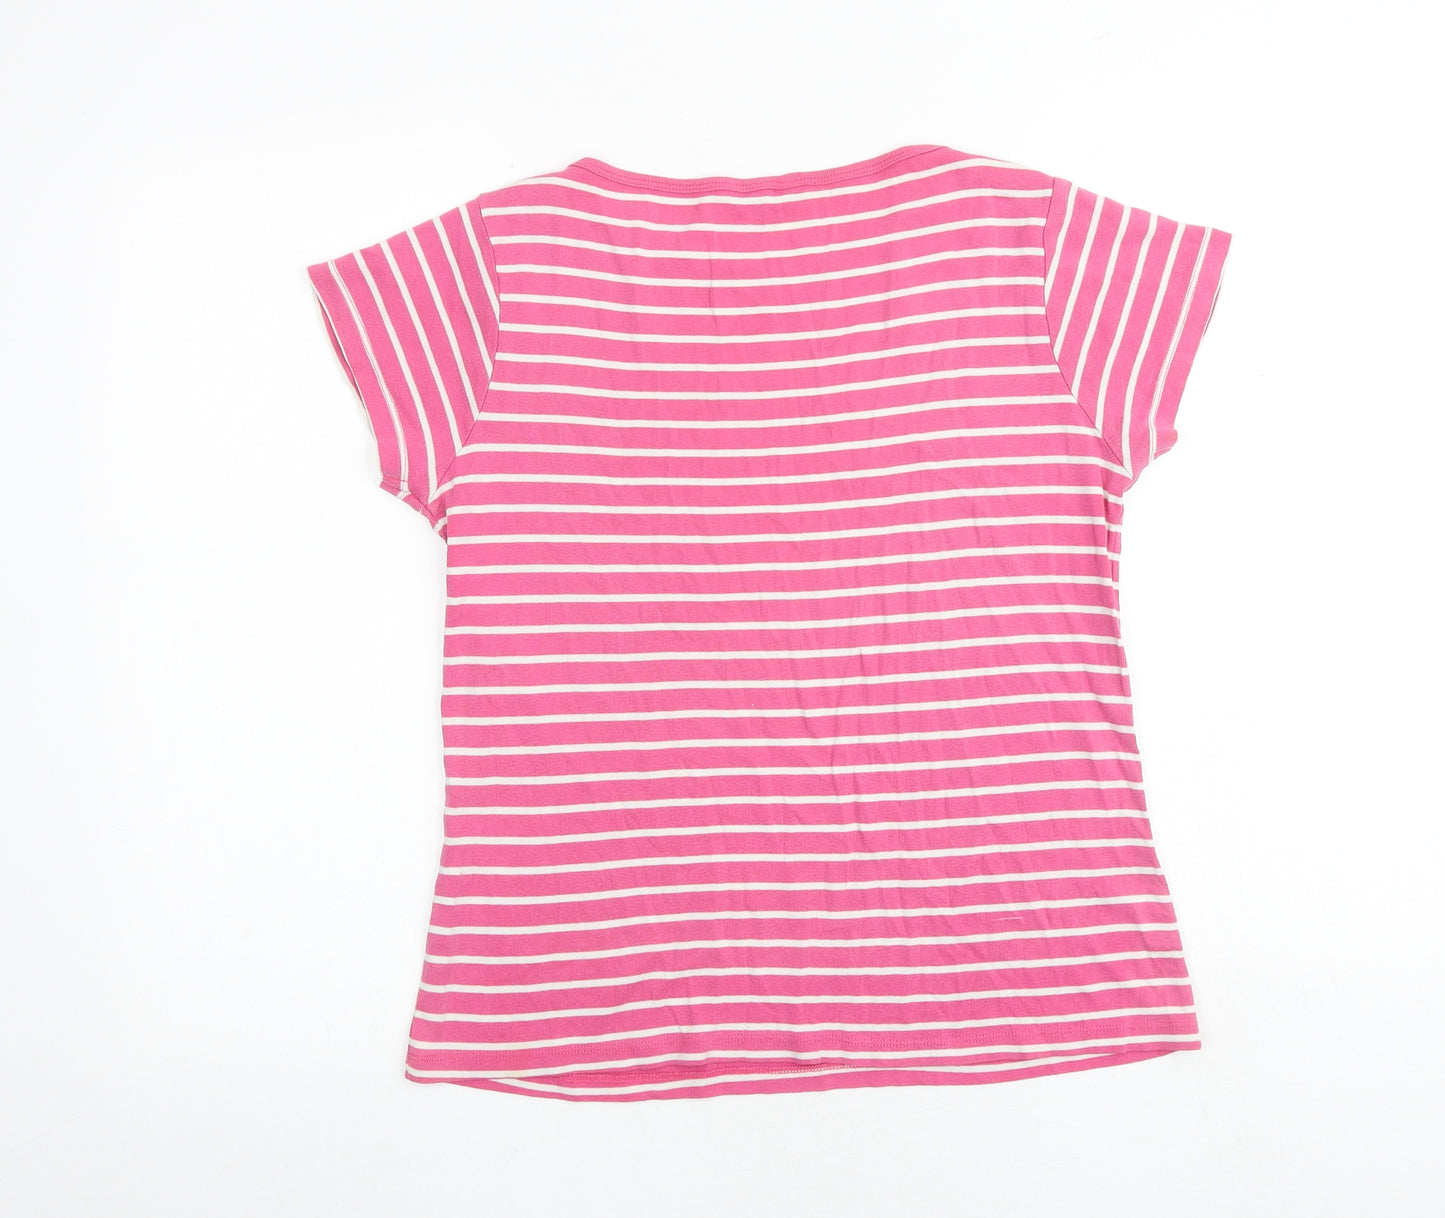 M&Co Womens Pink Striped 100% Cotton Basic T-Shirt Size 16 Boat Neck